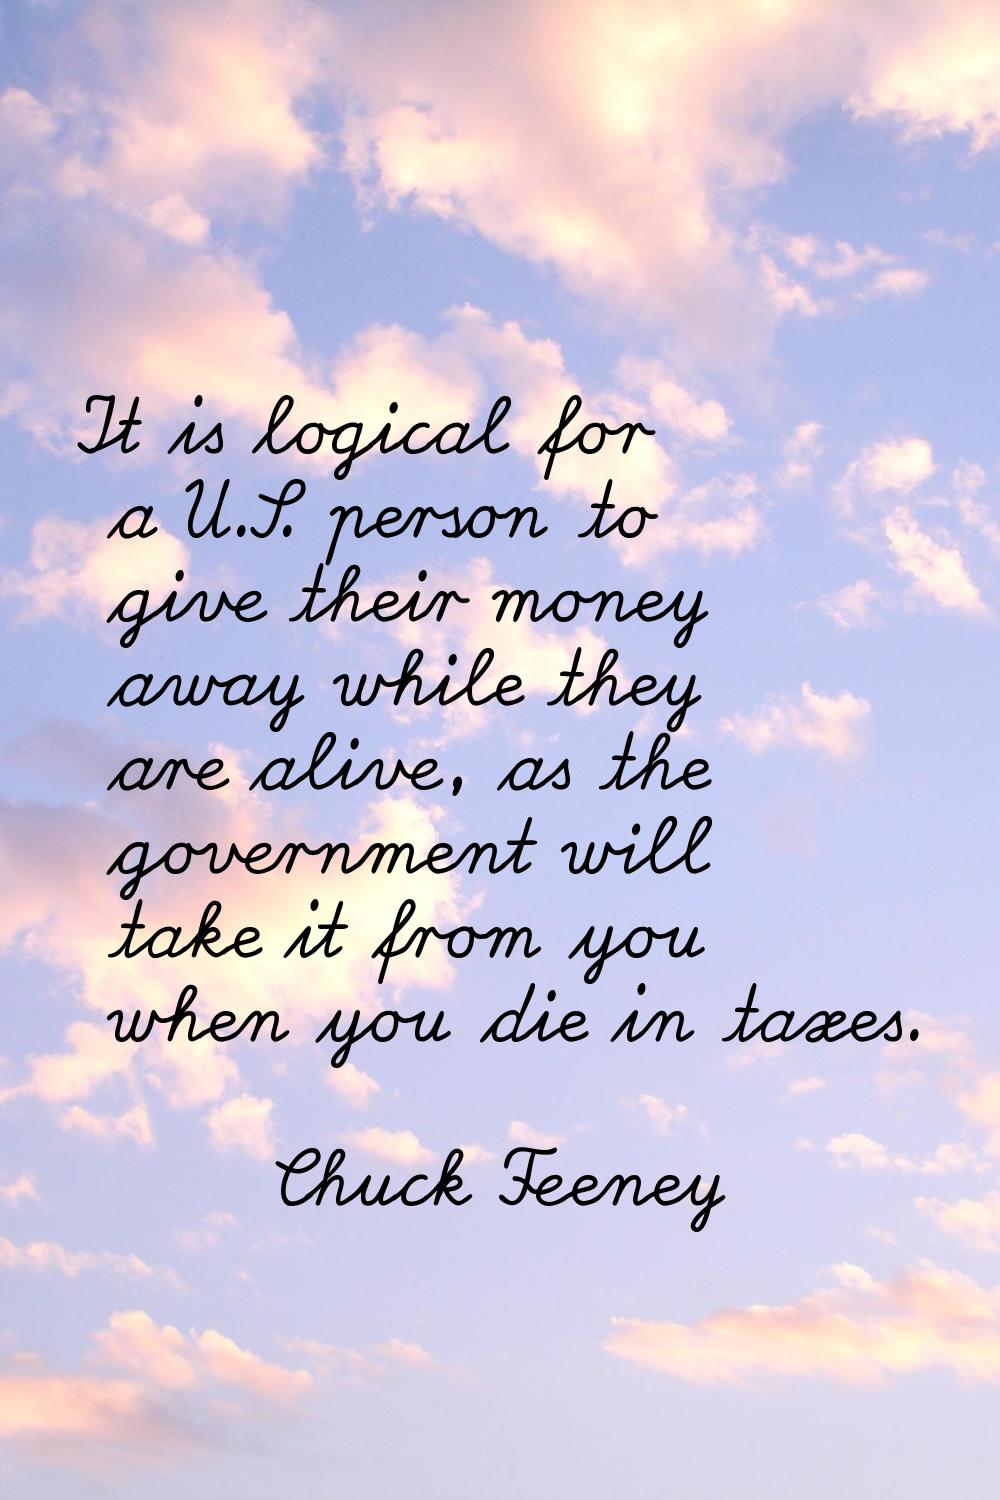 It is logical for a U.S. person to give their money away while they are alive, as the government wi